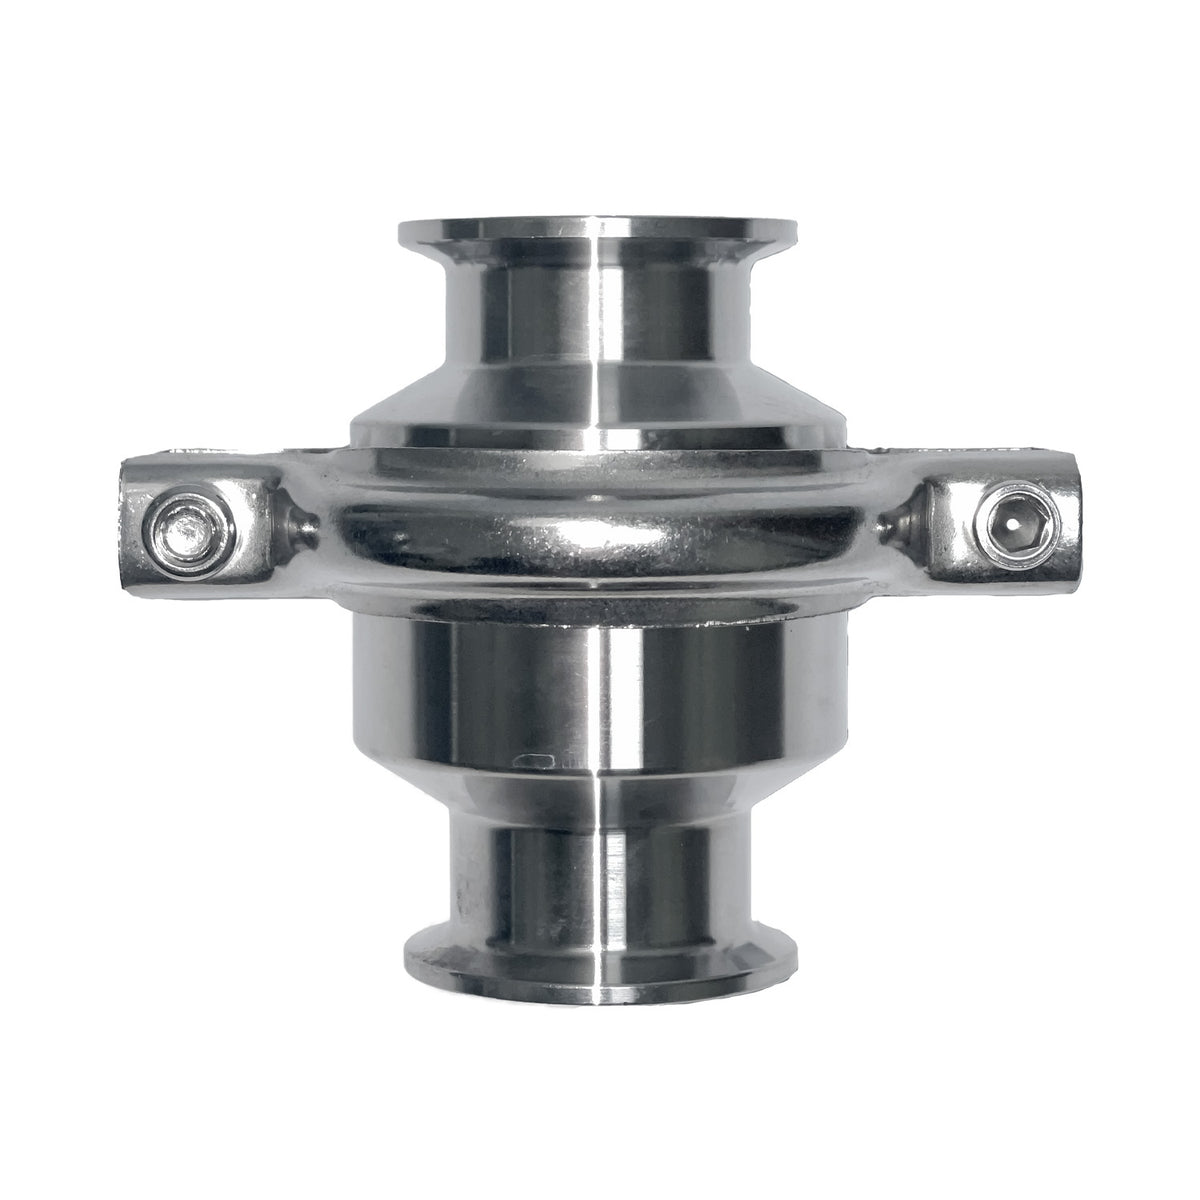 High-quality 1.5&quot; Tri-Clamp check valve image for reliable fluid control. This check valve is designed to meet the demands of various industries, including brewing, food processing, and pharmaceuticals. The 1.5&quot; Tri-Clamp connection ensures a secure and leak-free installation.